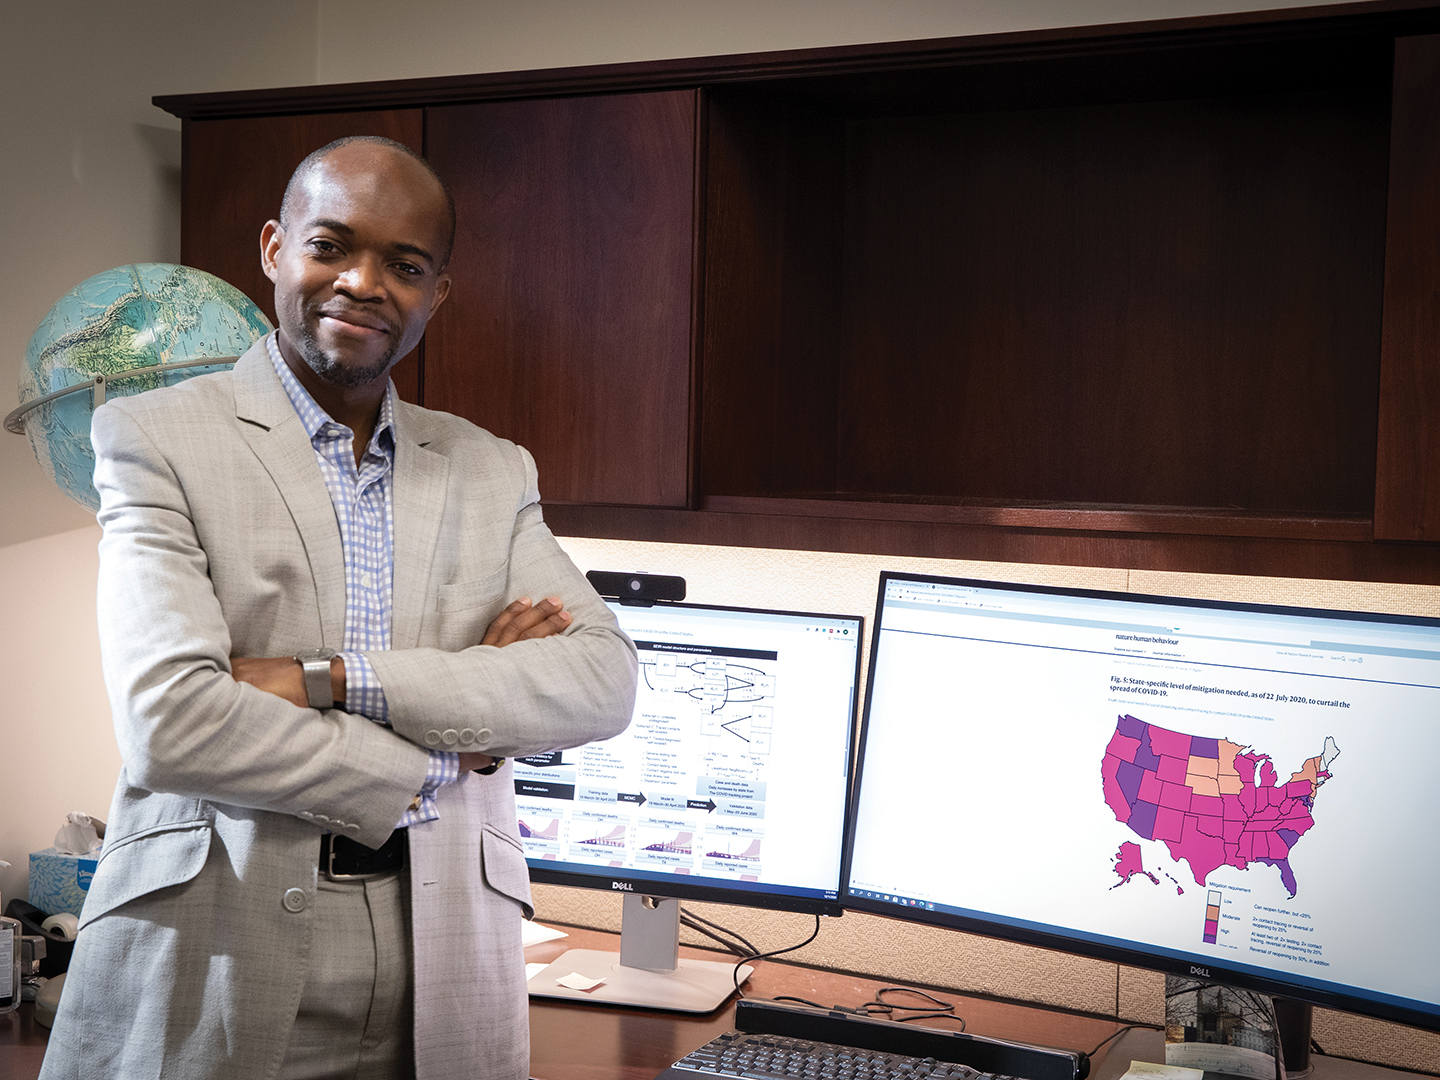 Dr. Martial Ndeffo in his office, with a COVID-19 response model on the computer screen